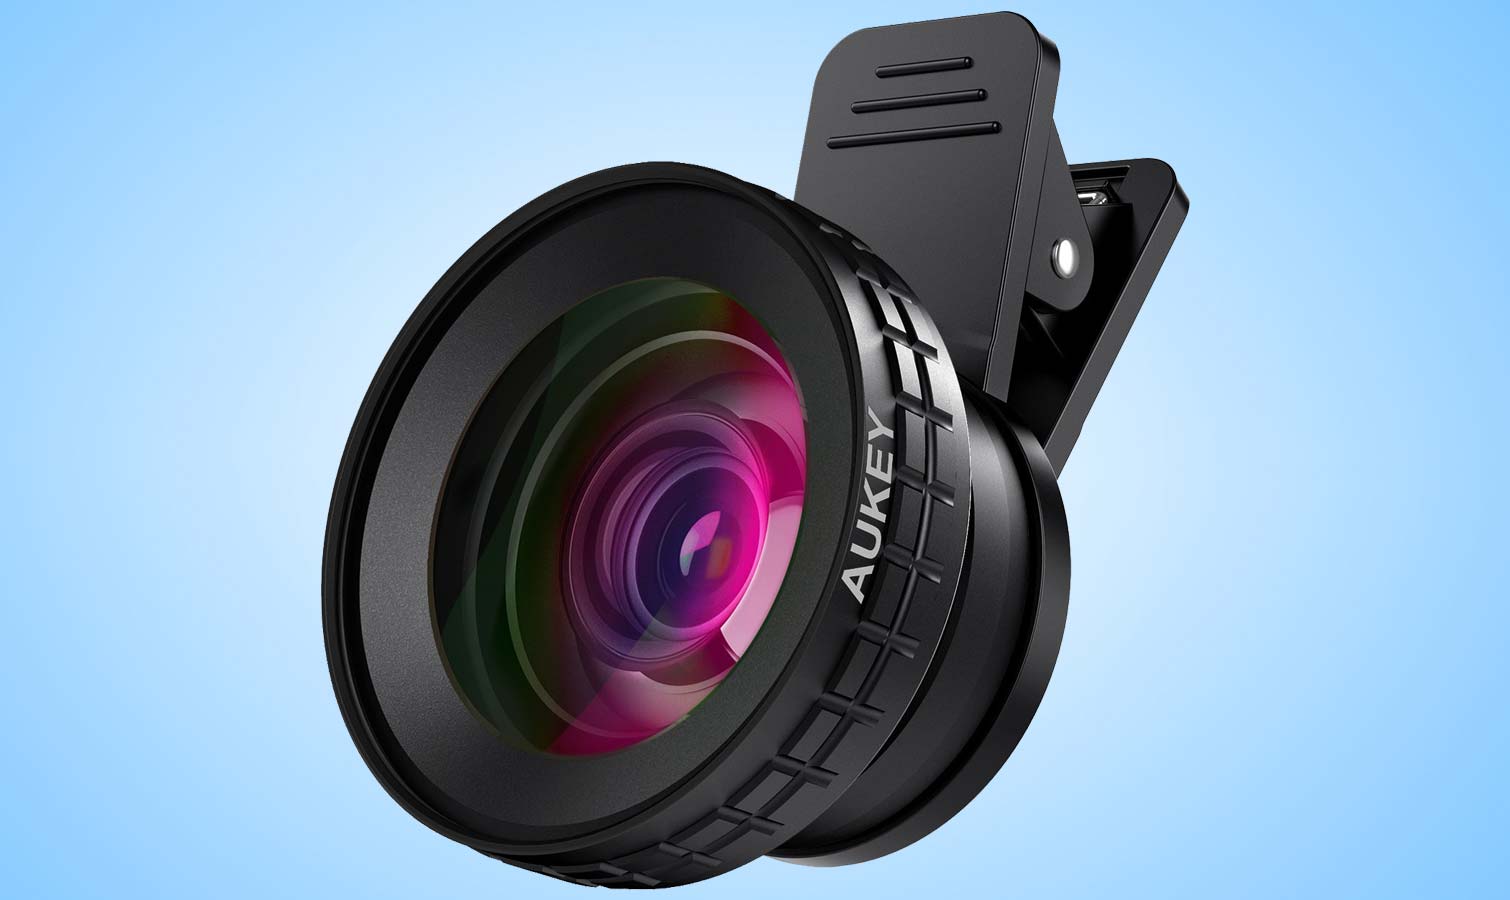 Aukey Ora Smartphone Lens Kit Full Review and | Tom's Guide